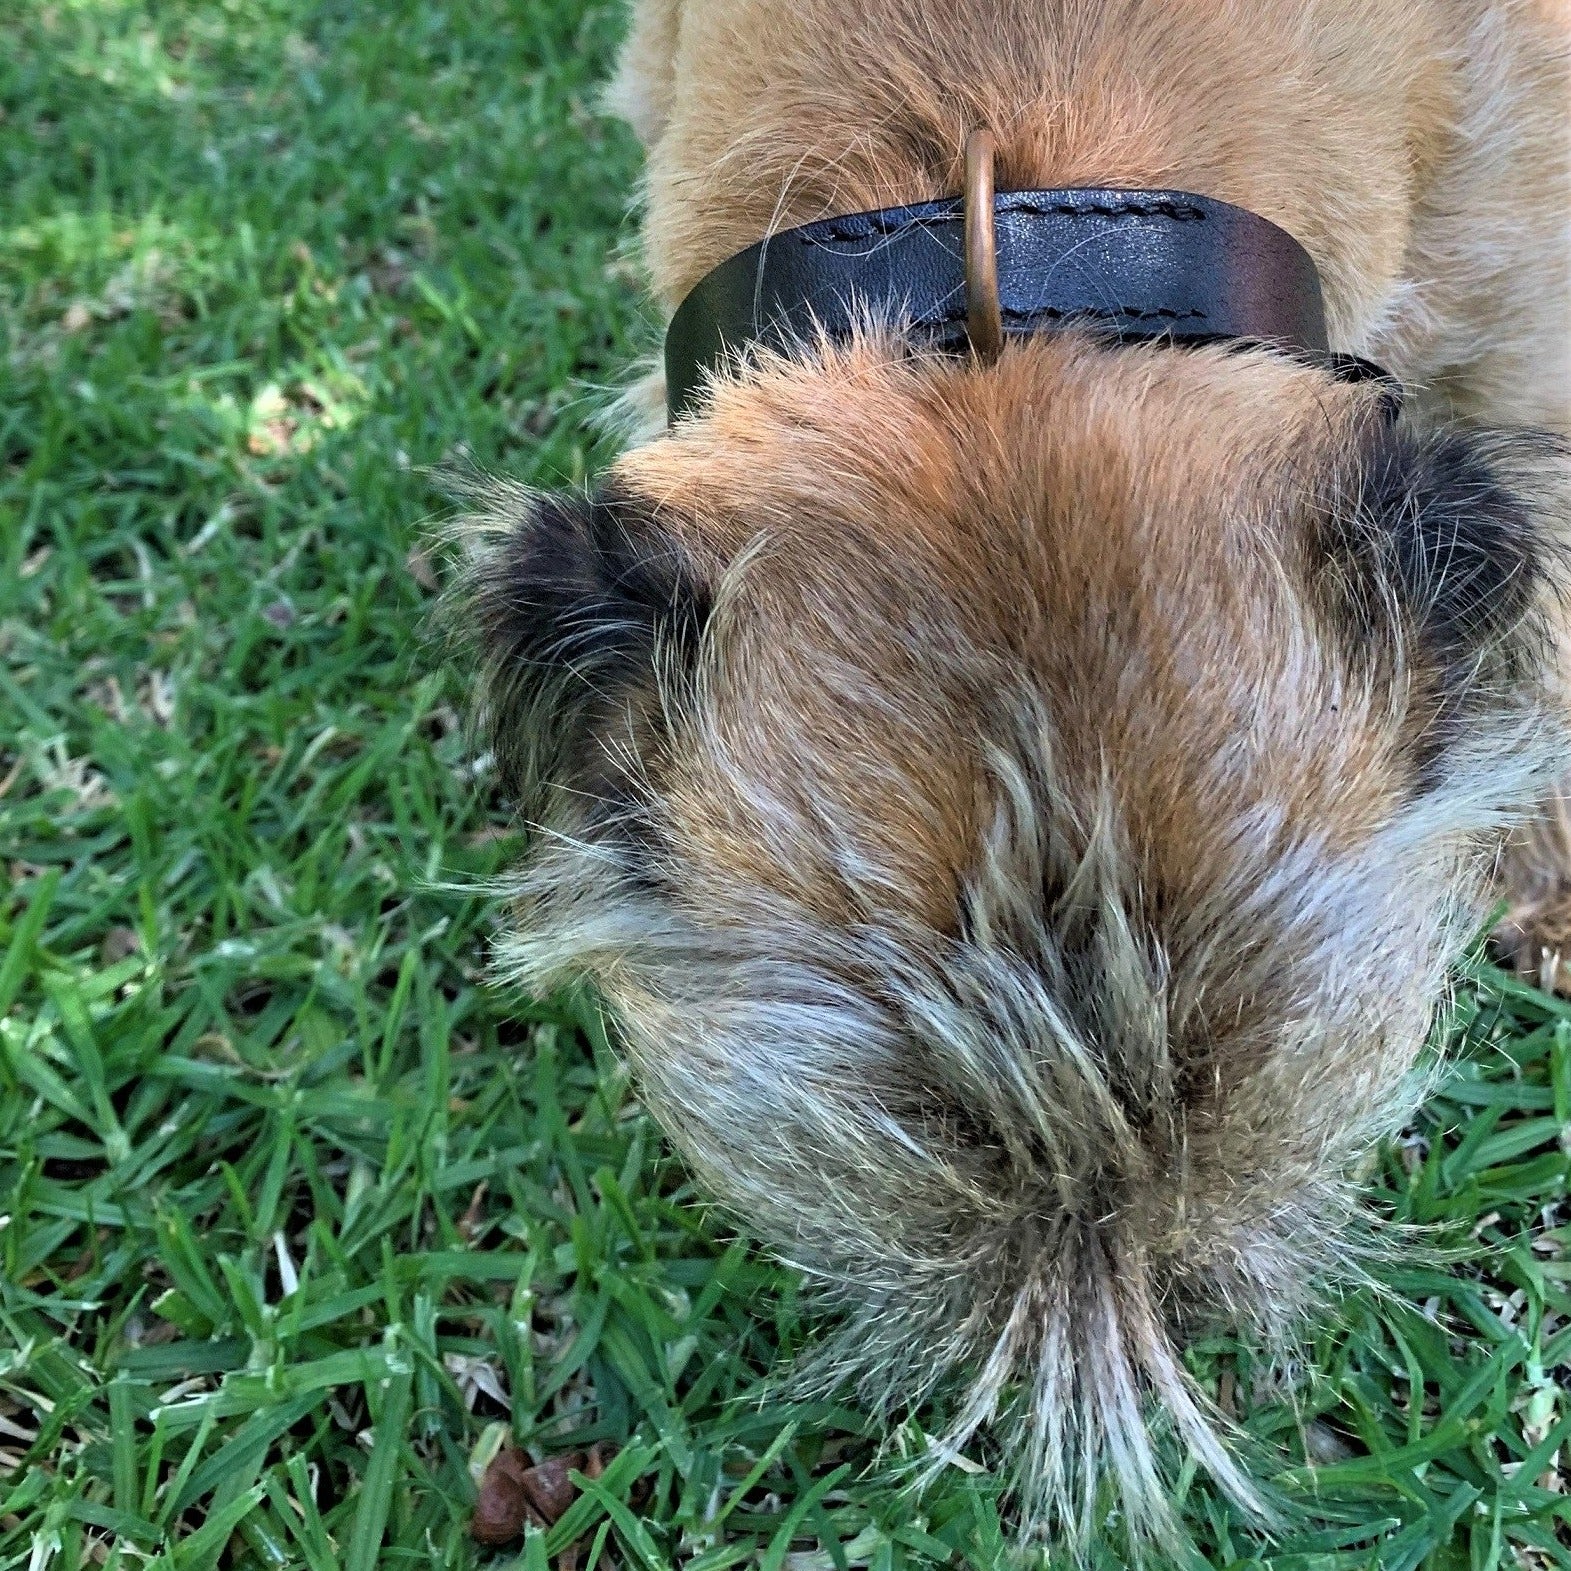 Close-up of the back of a small brown dog with a short, rough coat and gray-tipped ears, wearing a Bald Collar Black by Georgie Paws featuring antique brass hardware. The dog is sniffing the lush green grass with patches of sunlight filtering through, indicating an outdoor setting.